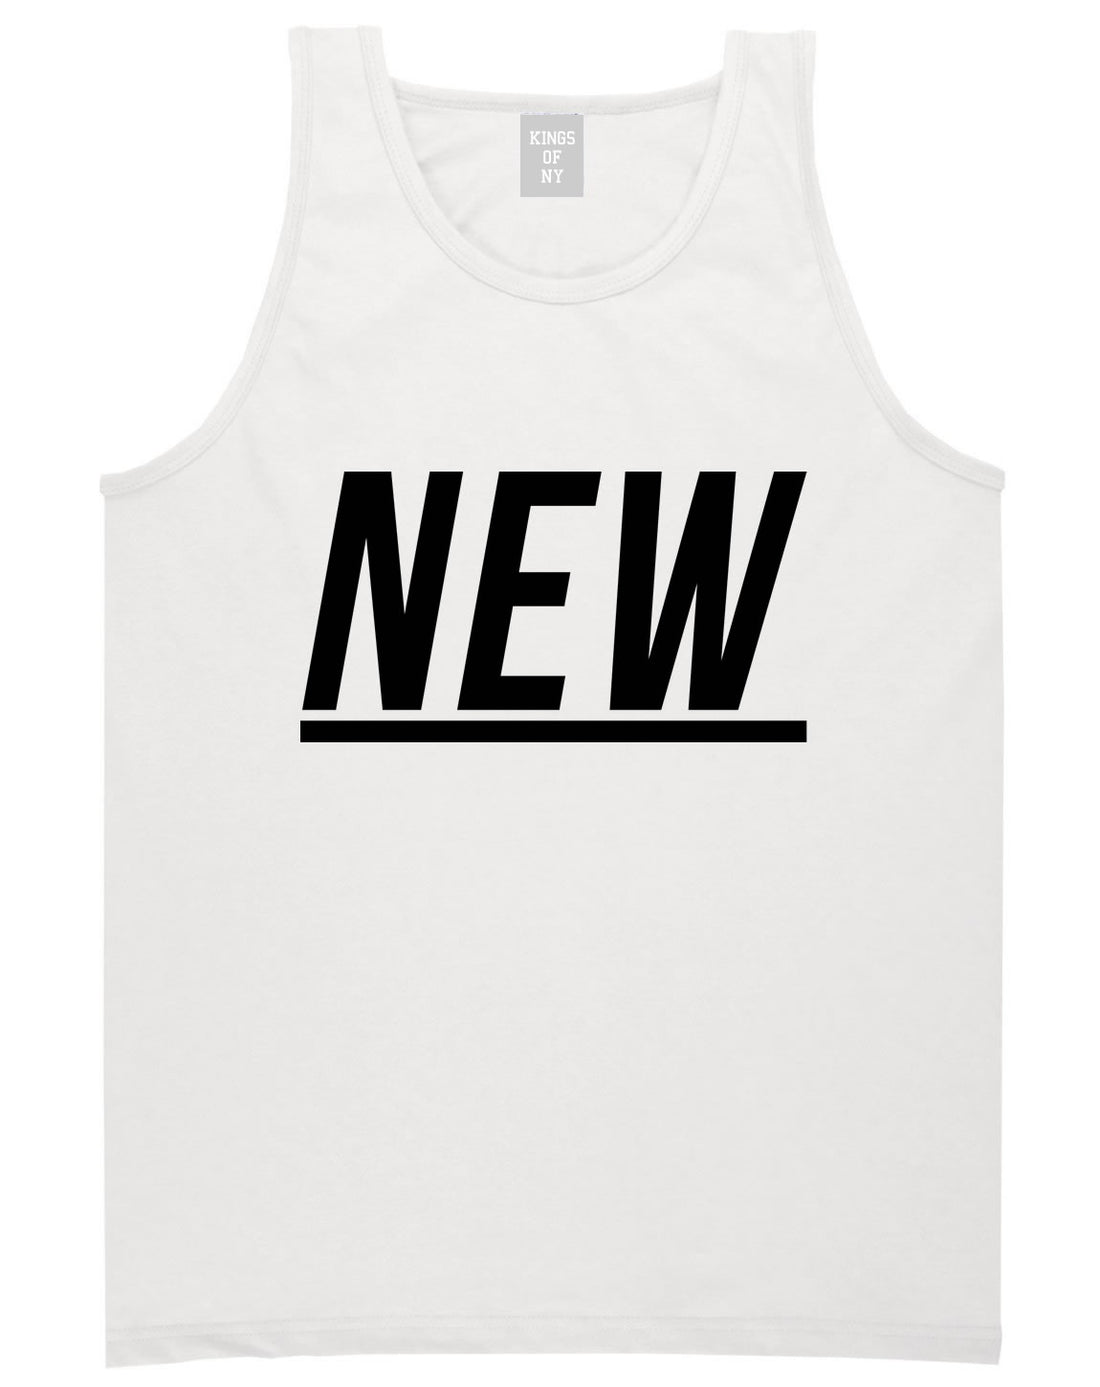 New Tank Top in White by Kings Of NY